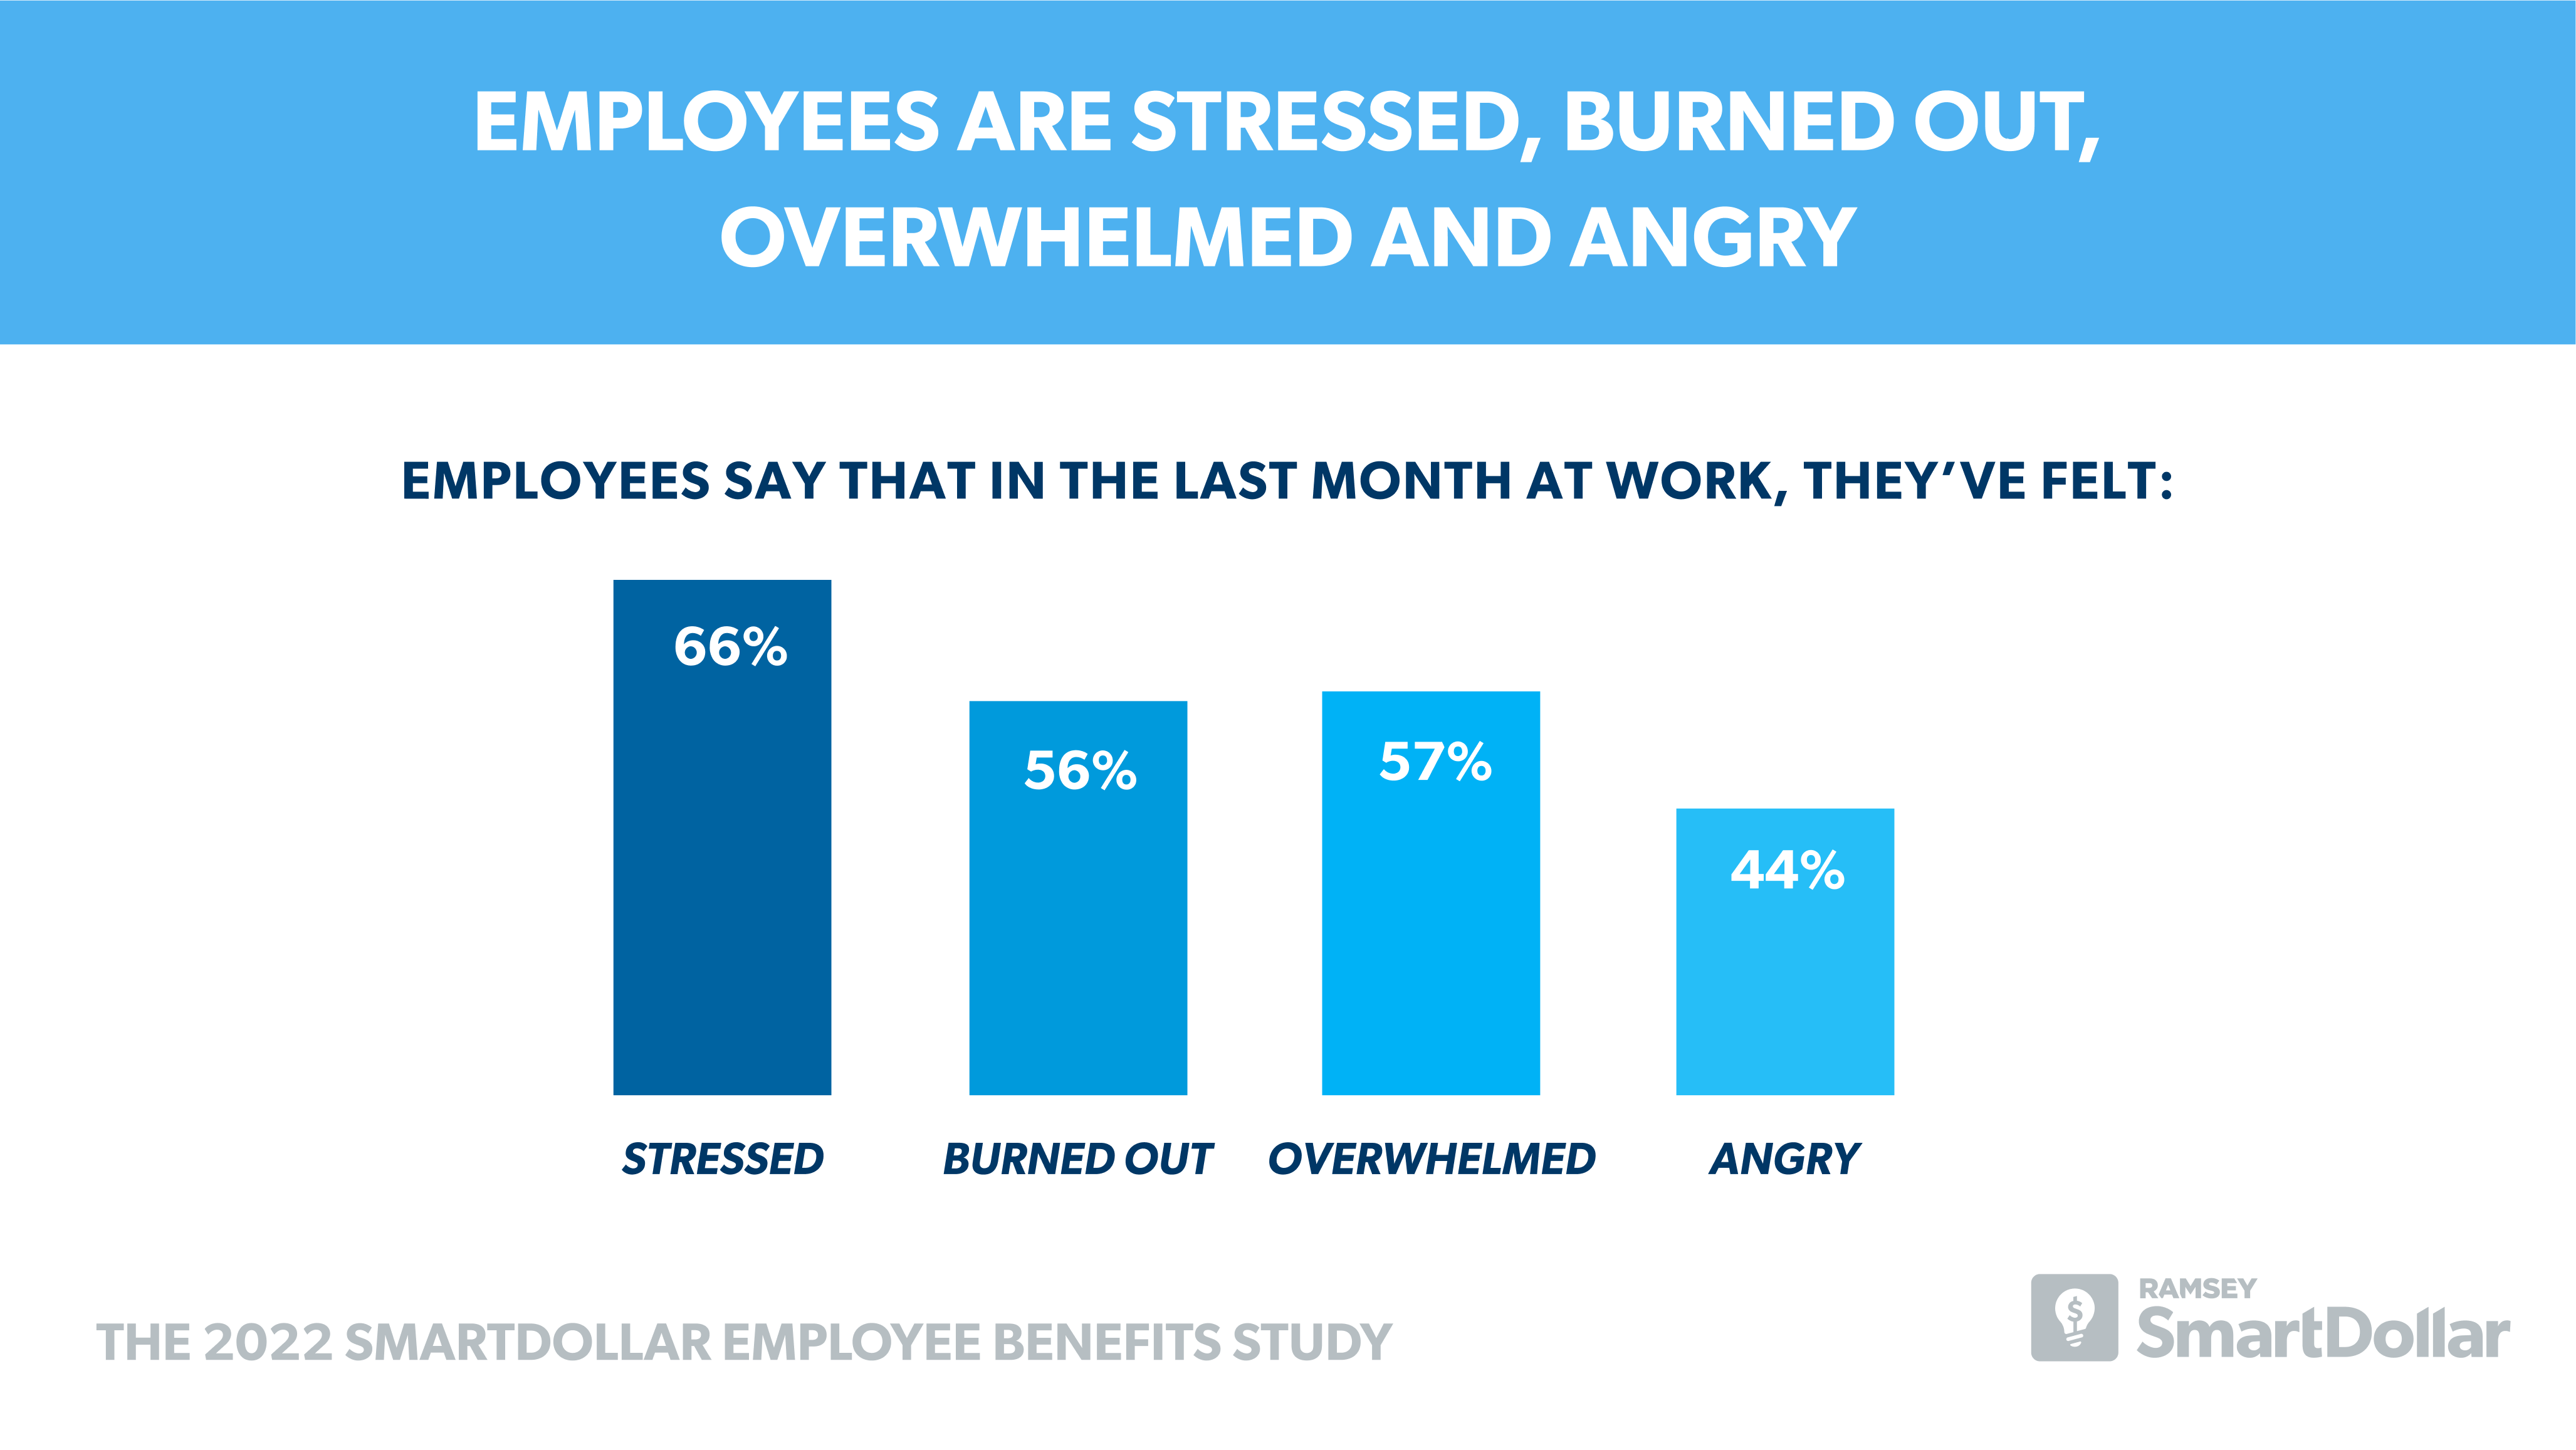 Employees Are Experiencing Stress, Burnout, Overwhelm and Anger  